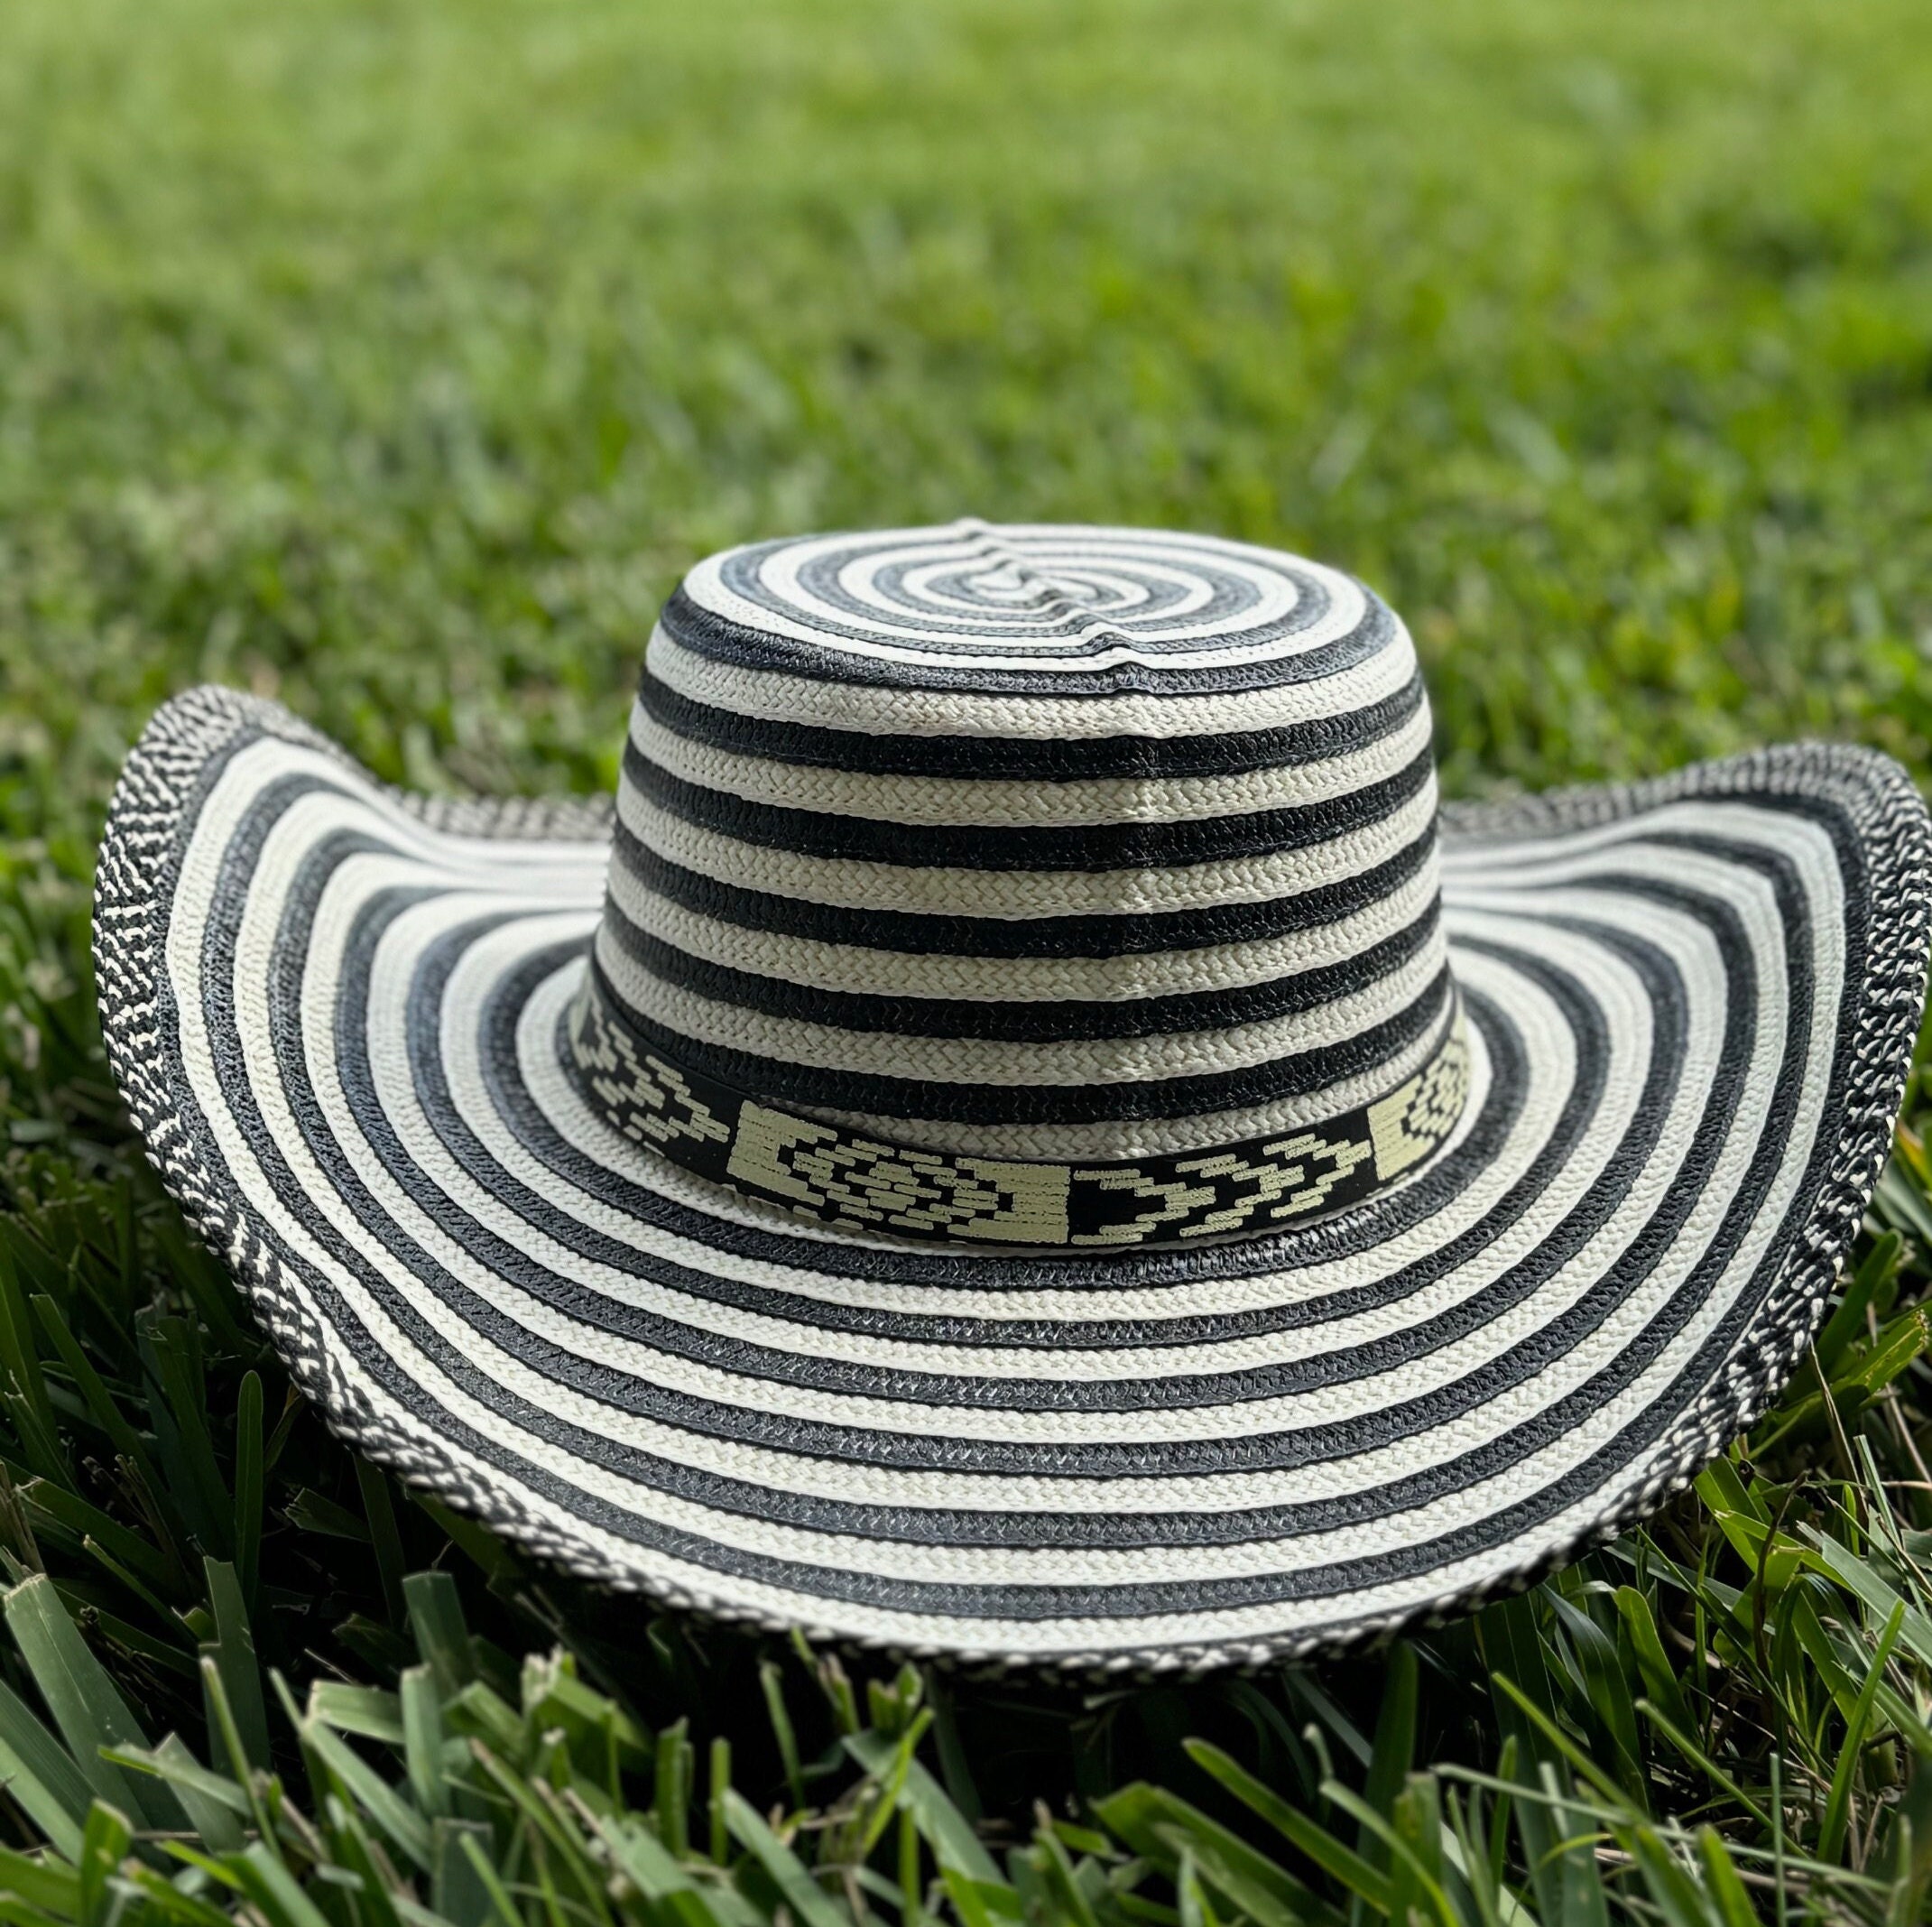 Western Cowboy Sombrero For Men And Women Stylish And Versatile Headwear  With Unique Design From Rnoq, $24.6